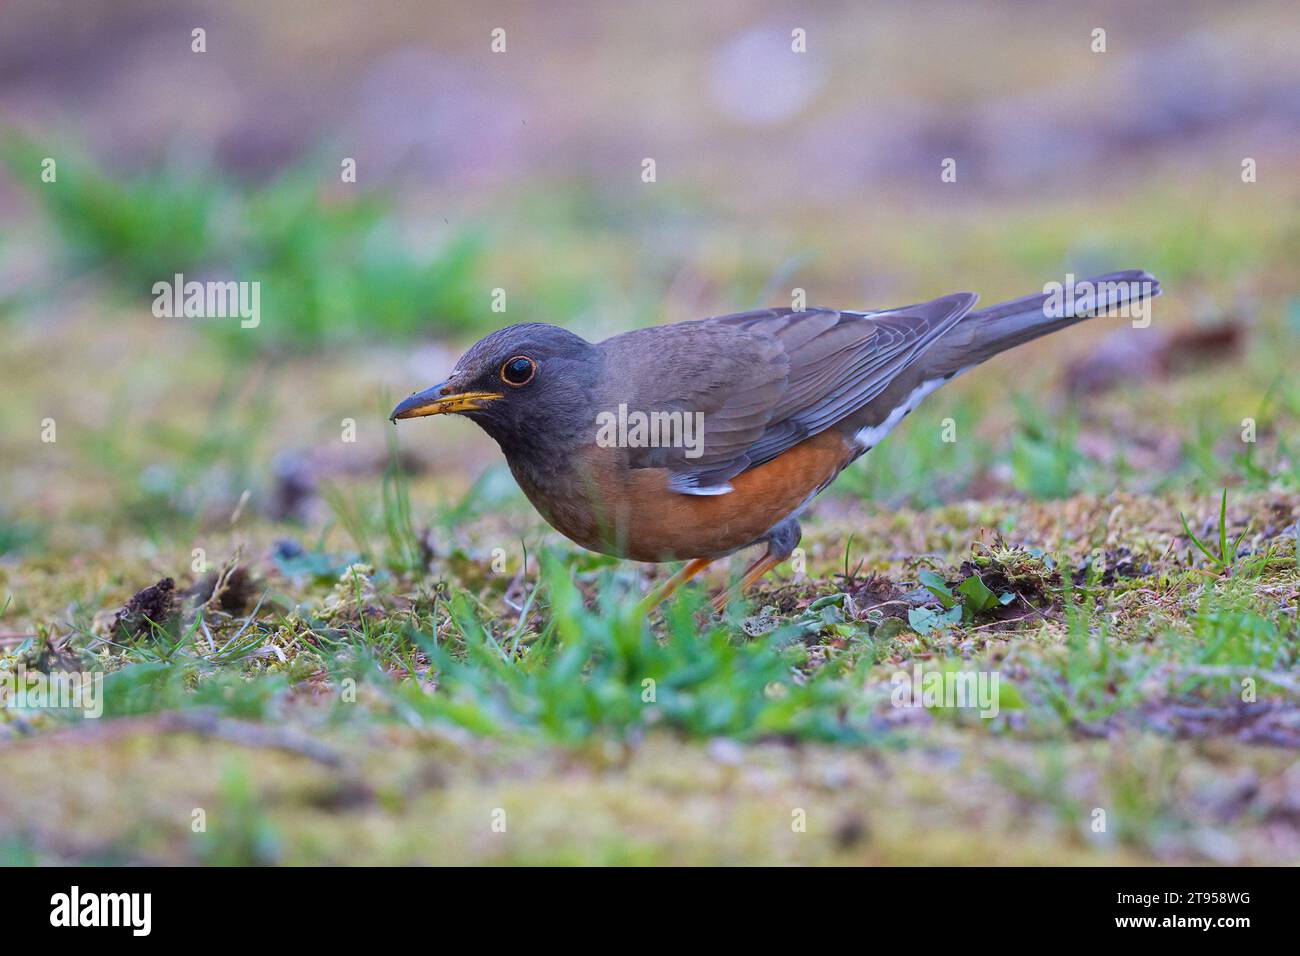 red-billed thrush, brown-headed thrush (Turdus chrysolaus), male foraging on the ground, side view, Japan, Hokkaido Stock Photo